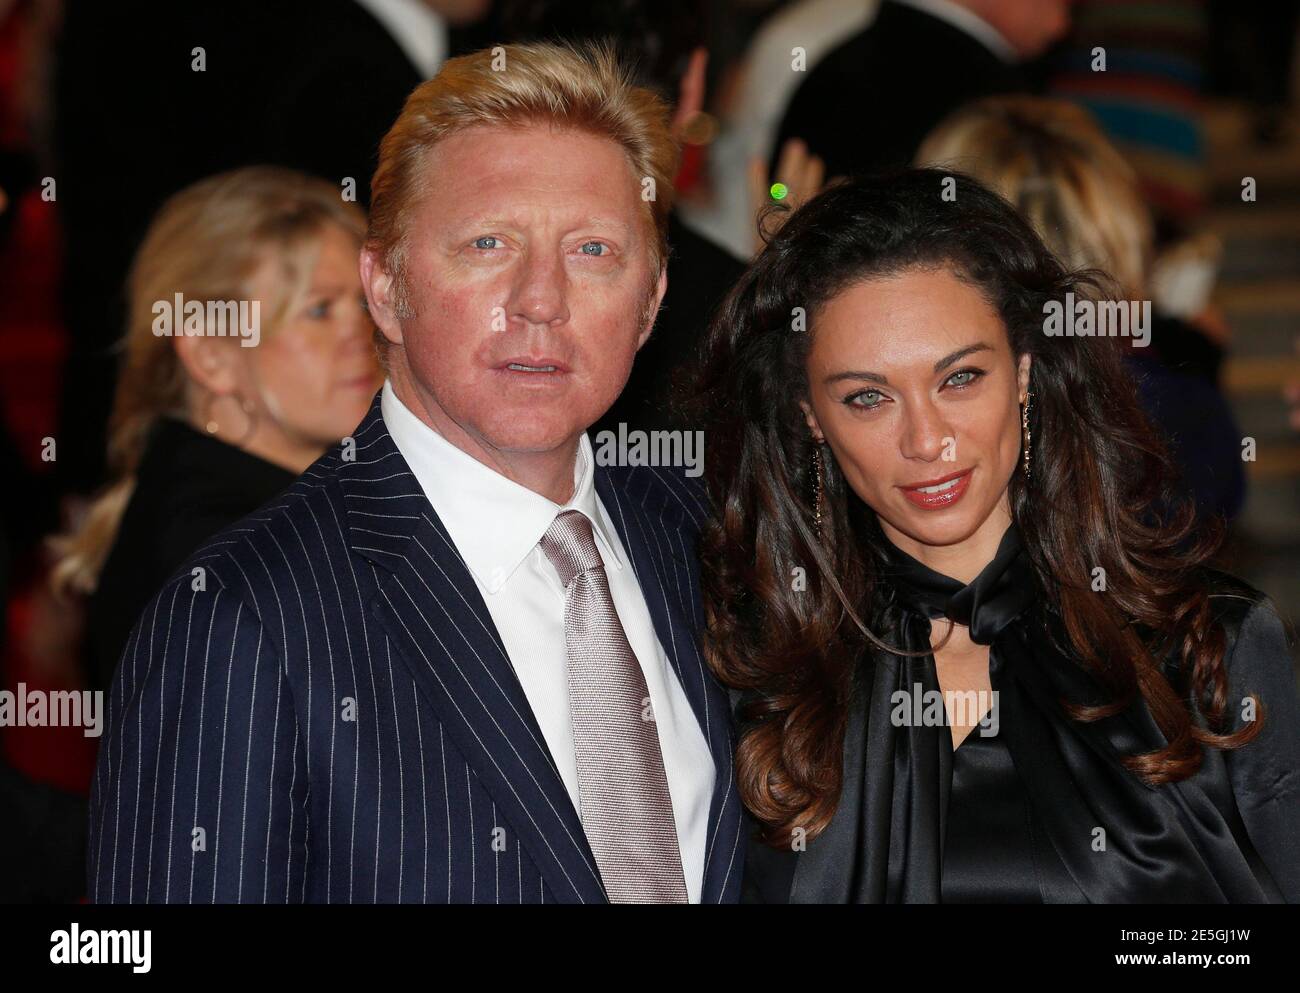 Former German tennis champion Boris Becker and his wife Lilly arrive for  the royal world premiere of the new 007 film Skyfall at the Royal Albert  Hall in London October 23, 2012.